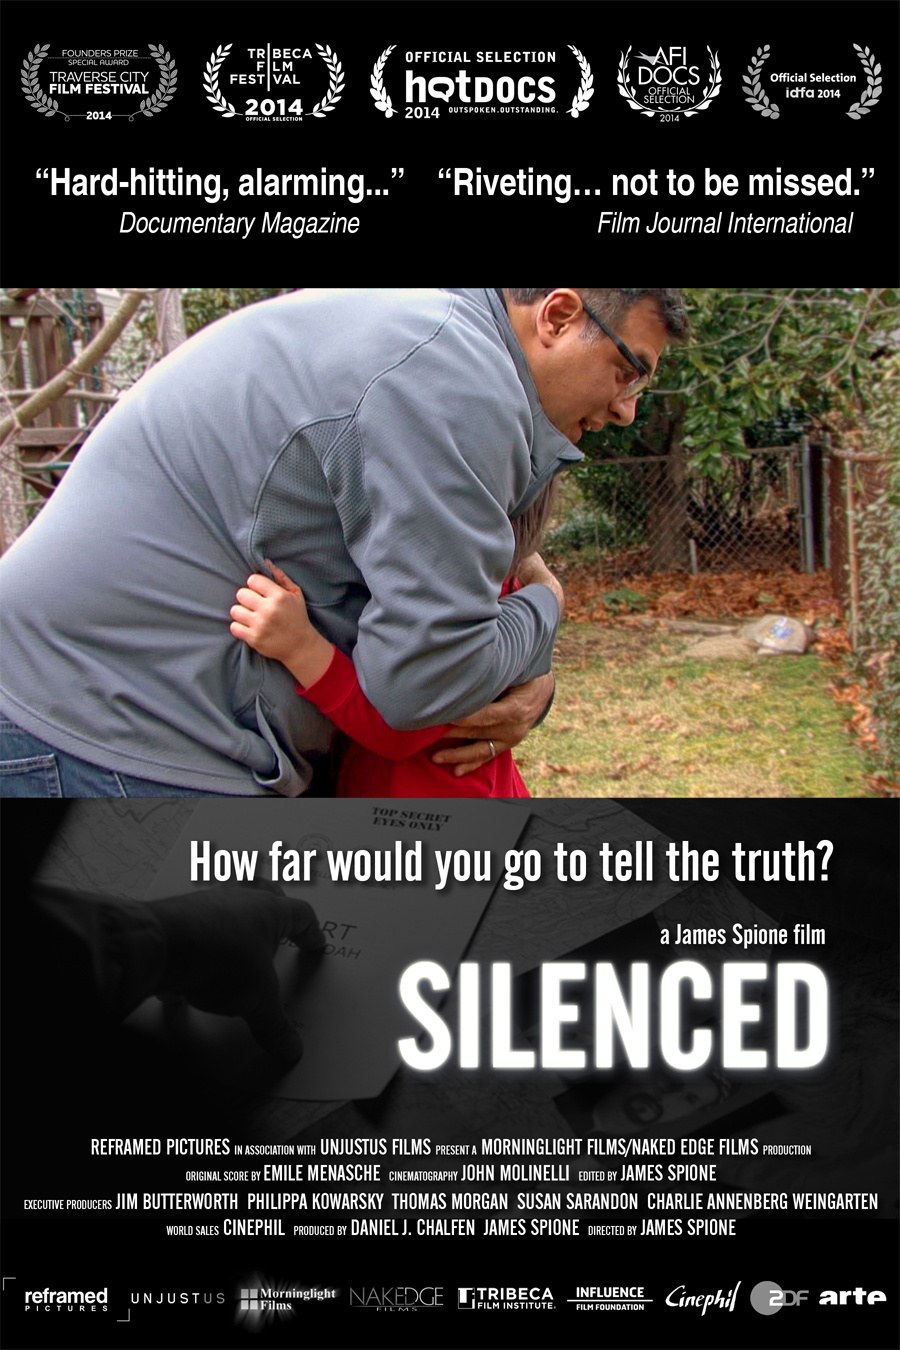 Poster for “Silenced”